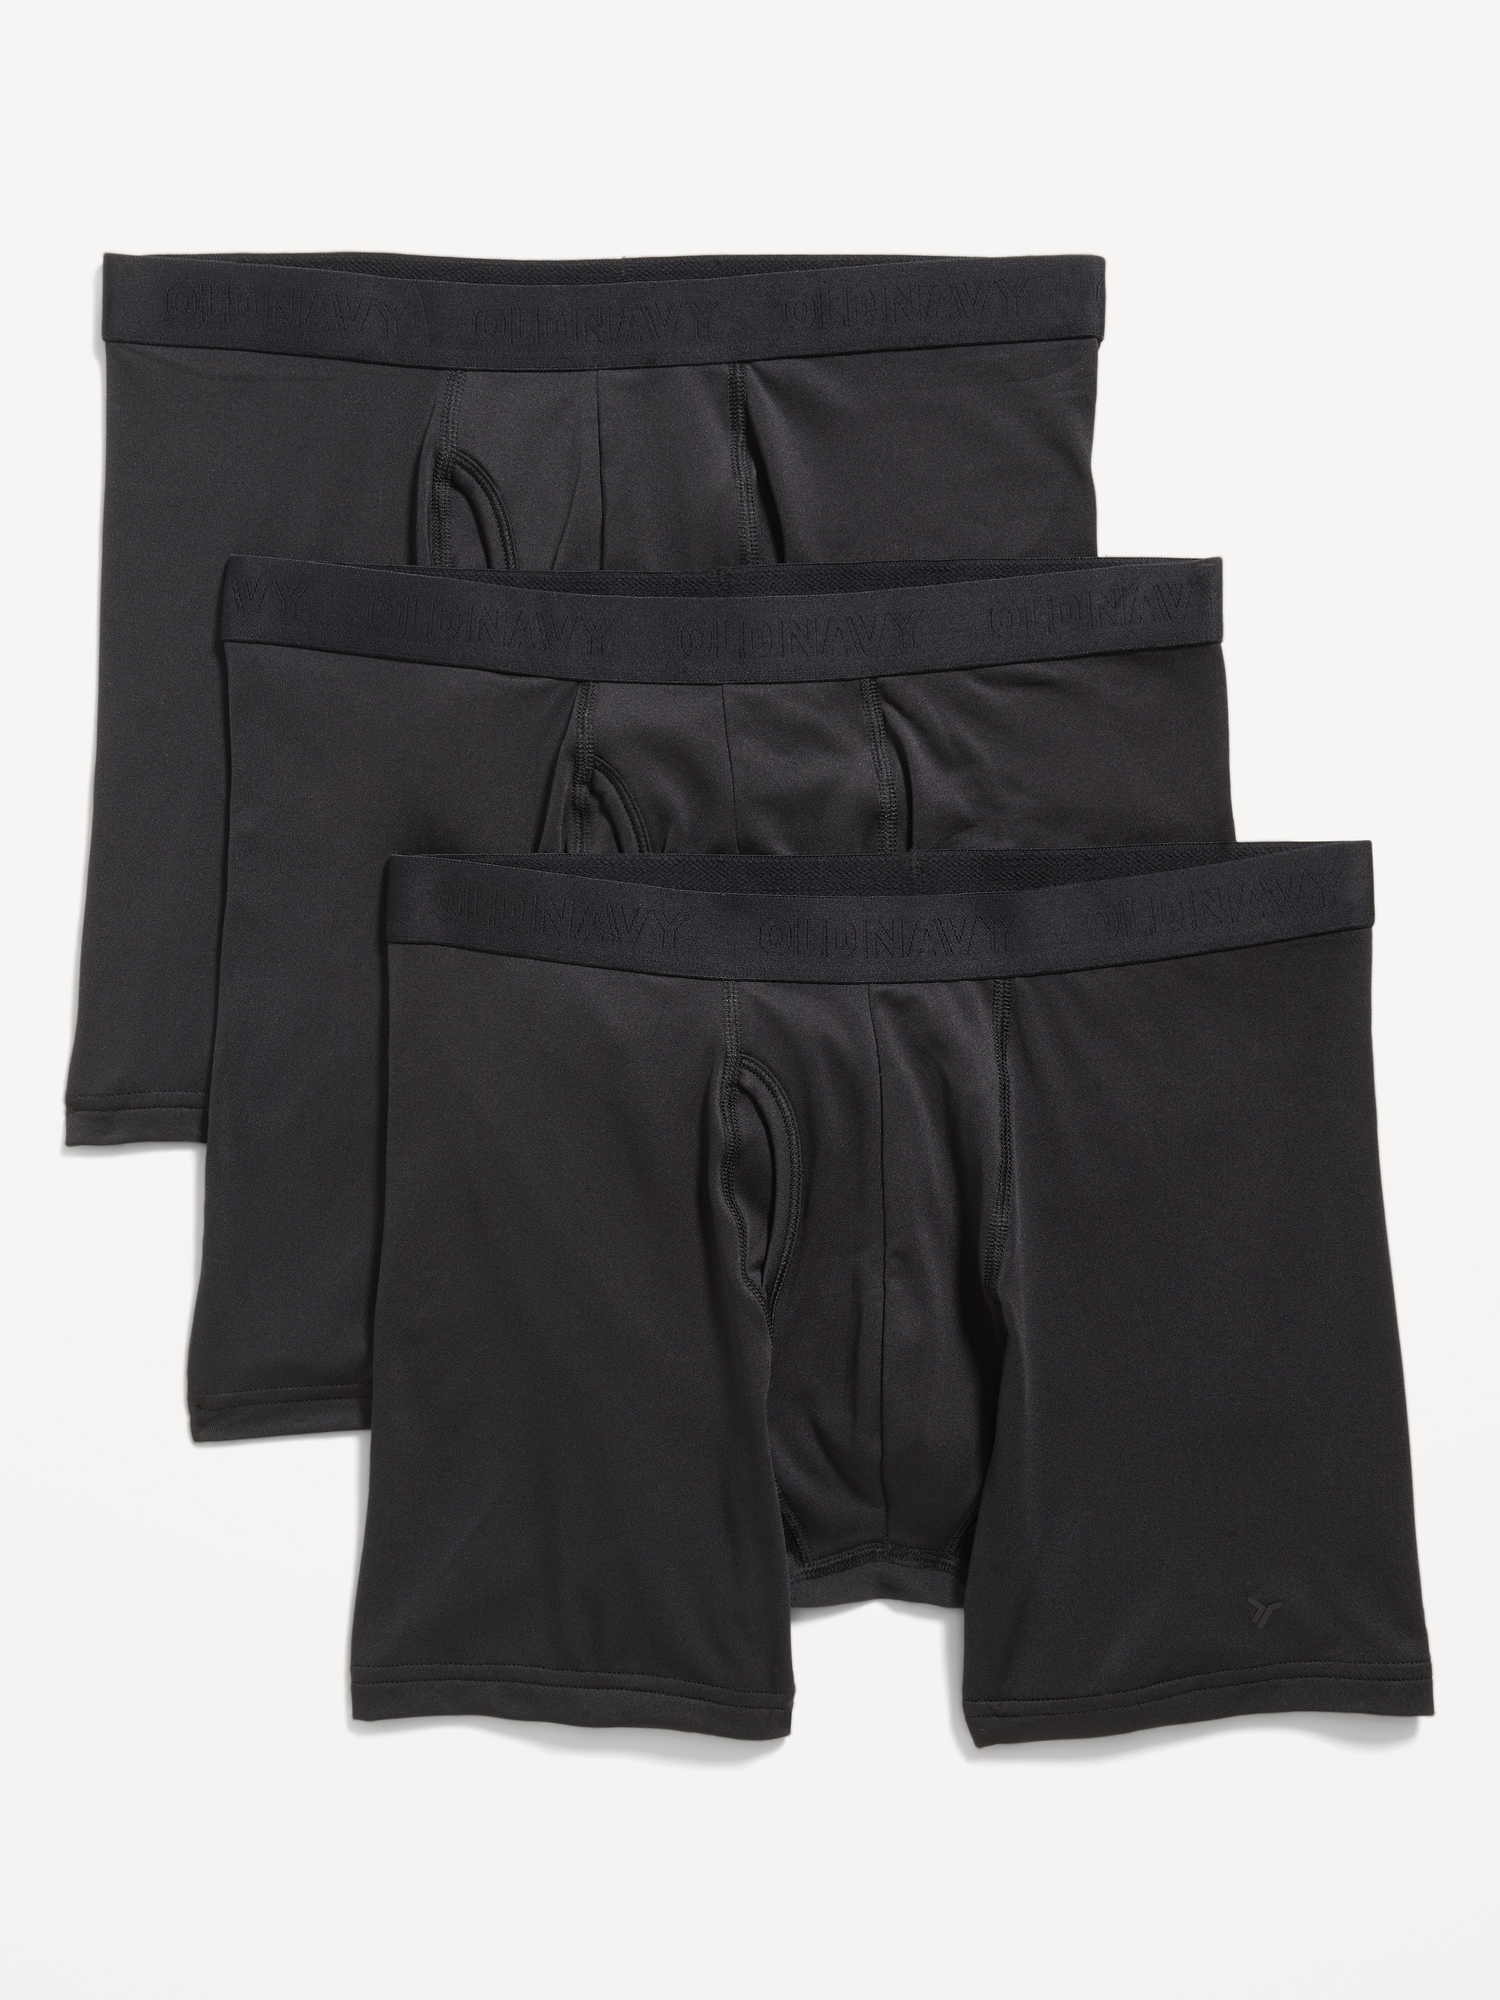 Stafford Dry + Cool Breathable Mesh Mens 4 Pack Boxer Briefs